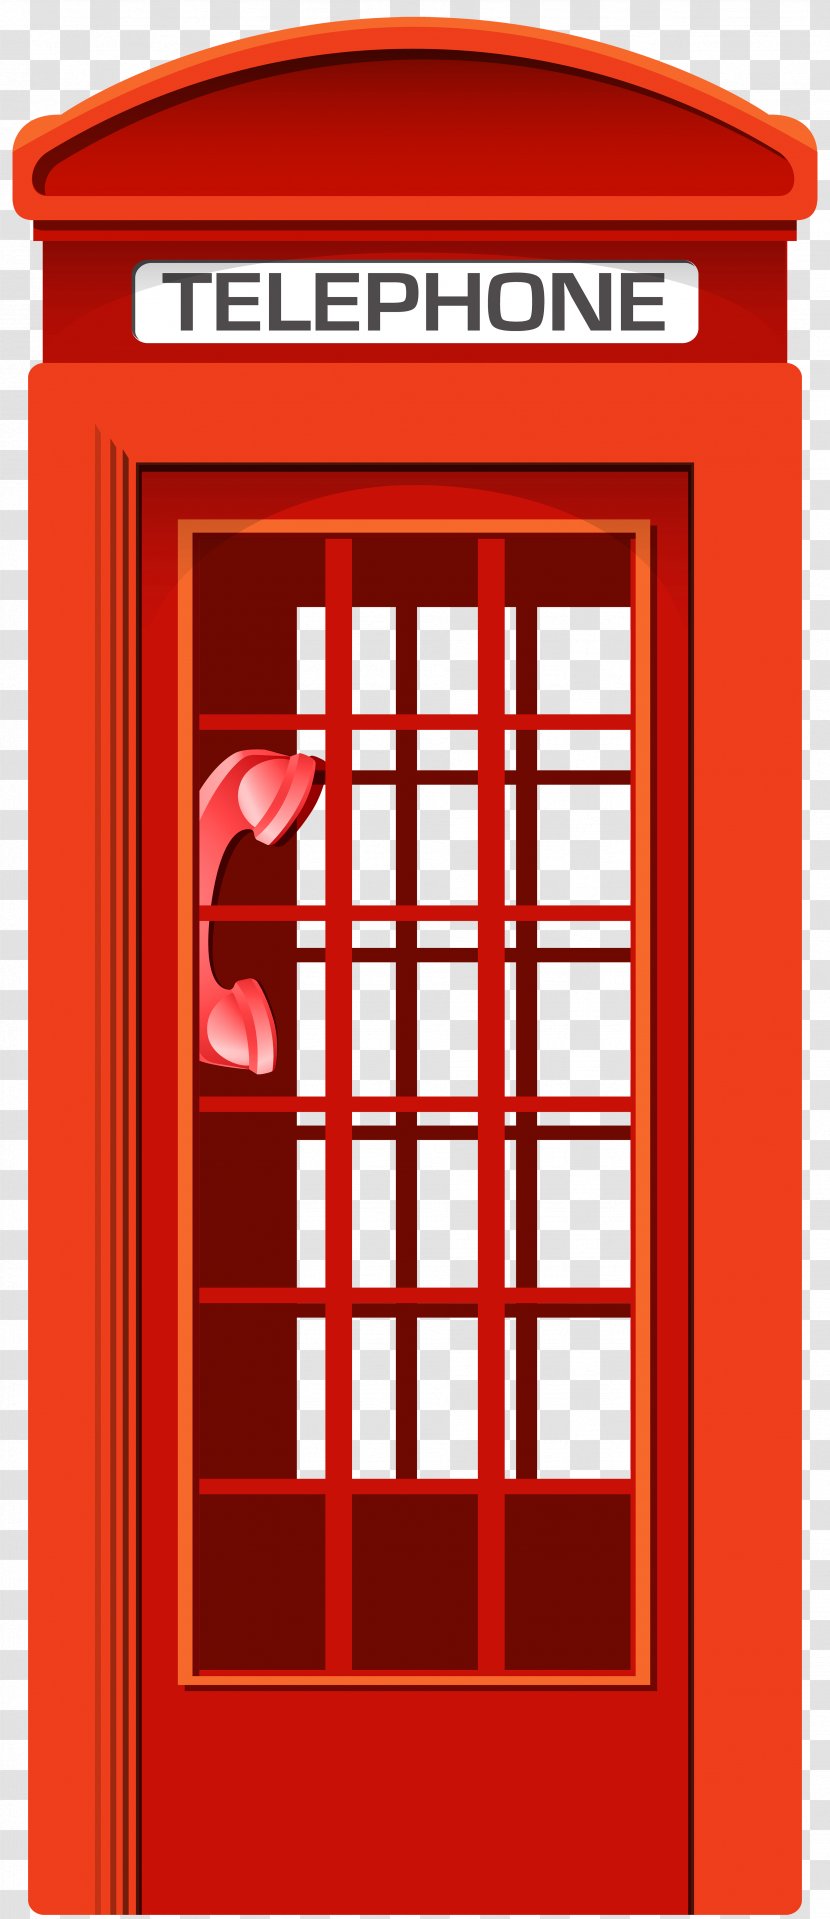 Telephone Booth Telephony Red Box Clip Art - Text Messaging Transparent PNG